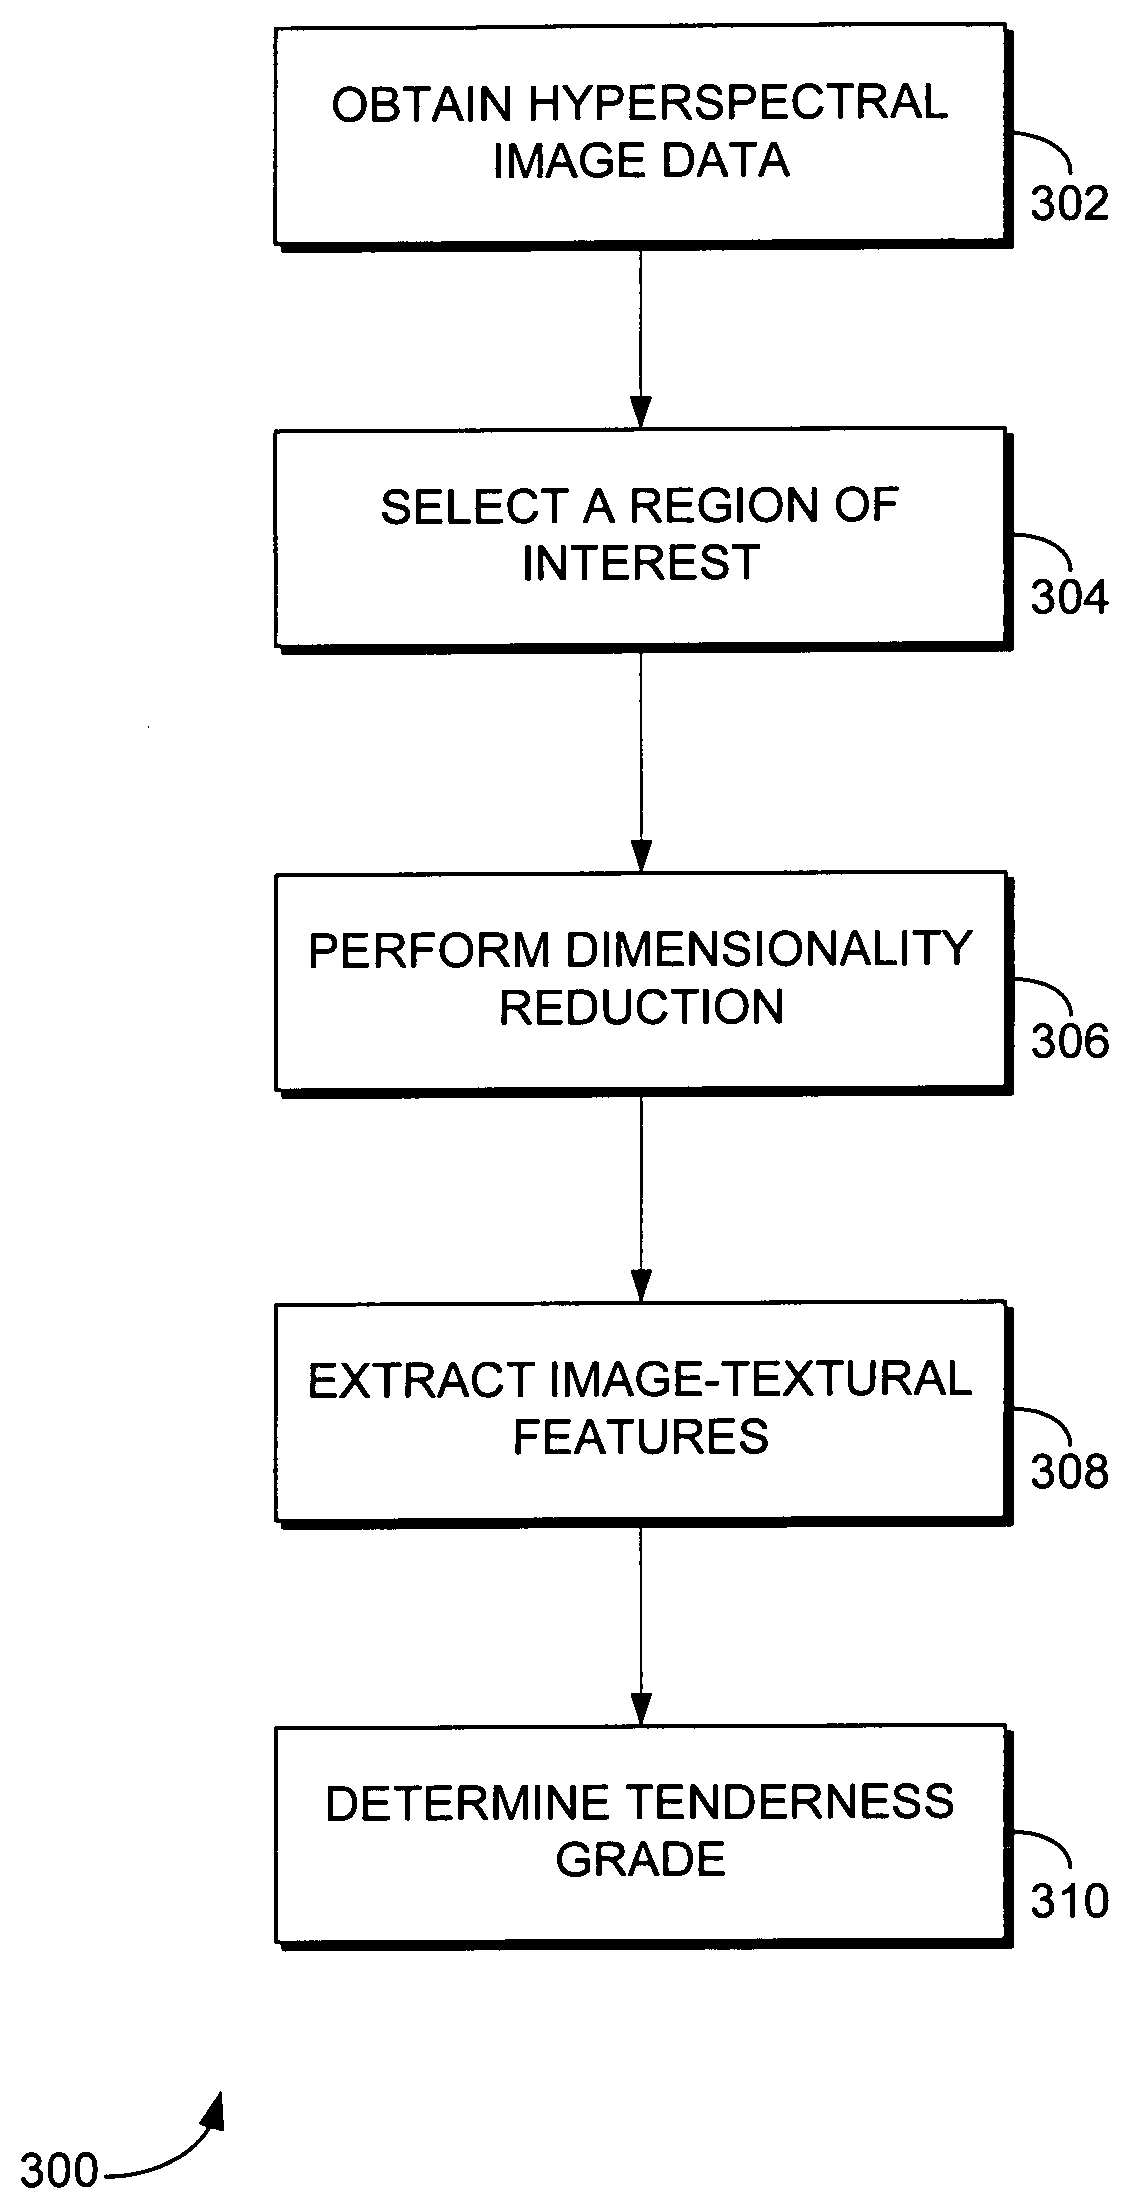 System and method for analyzing material properties using hyperspectral imaging